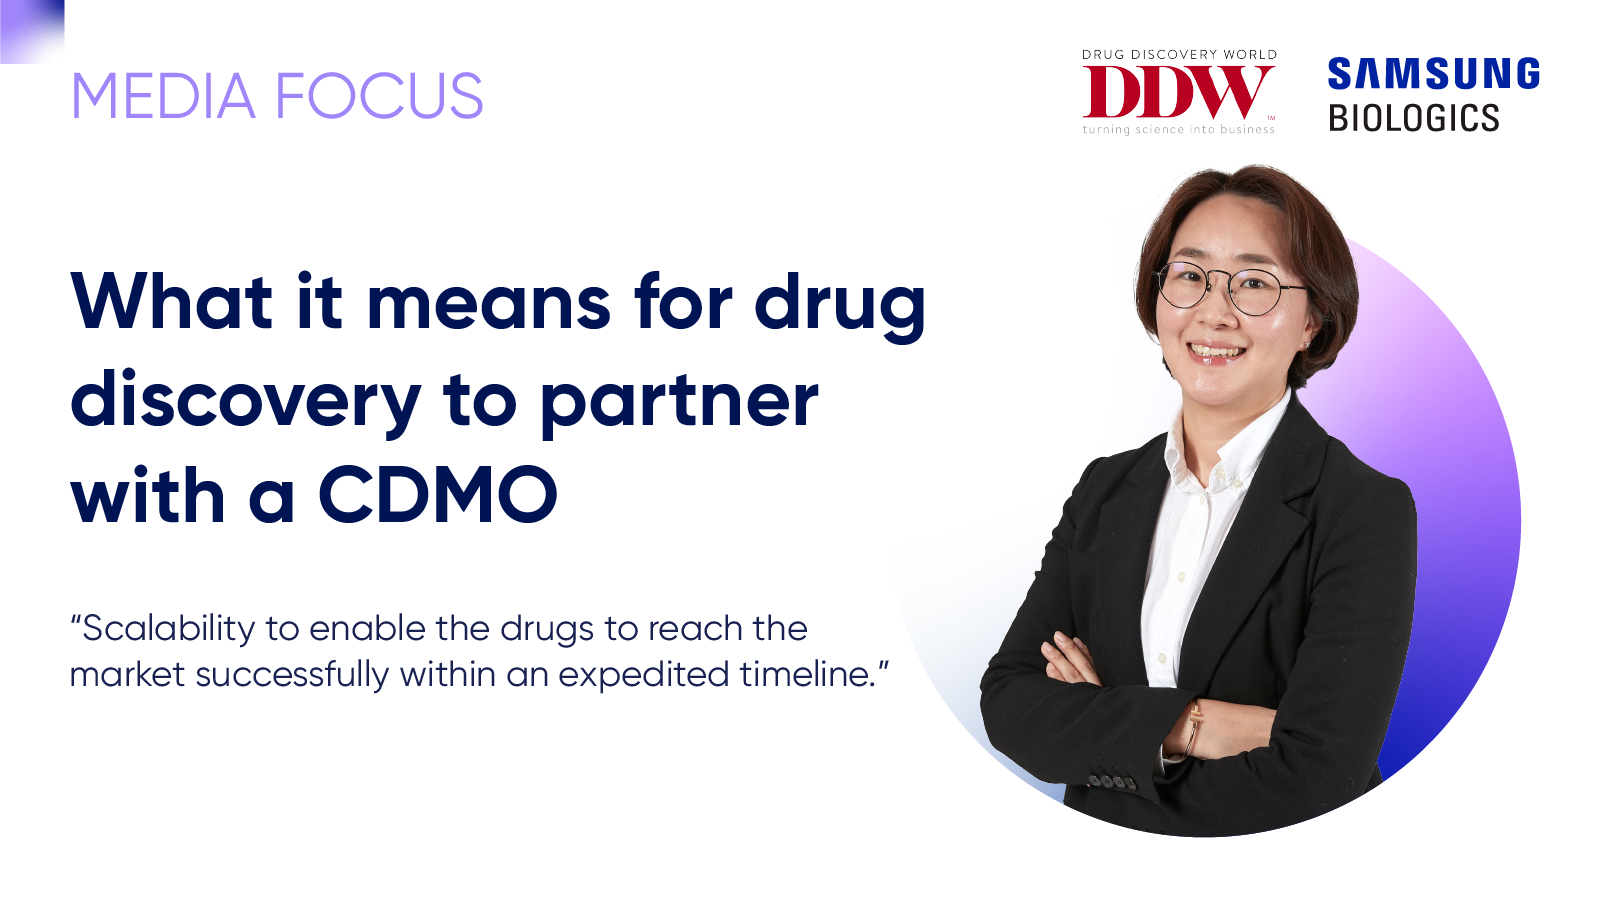 What it means for drug discovery to partner with a CDMO Scalability to enable the drugs to reach the market successfully within an expedited timeline.